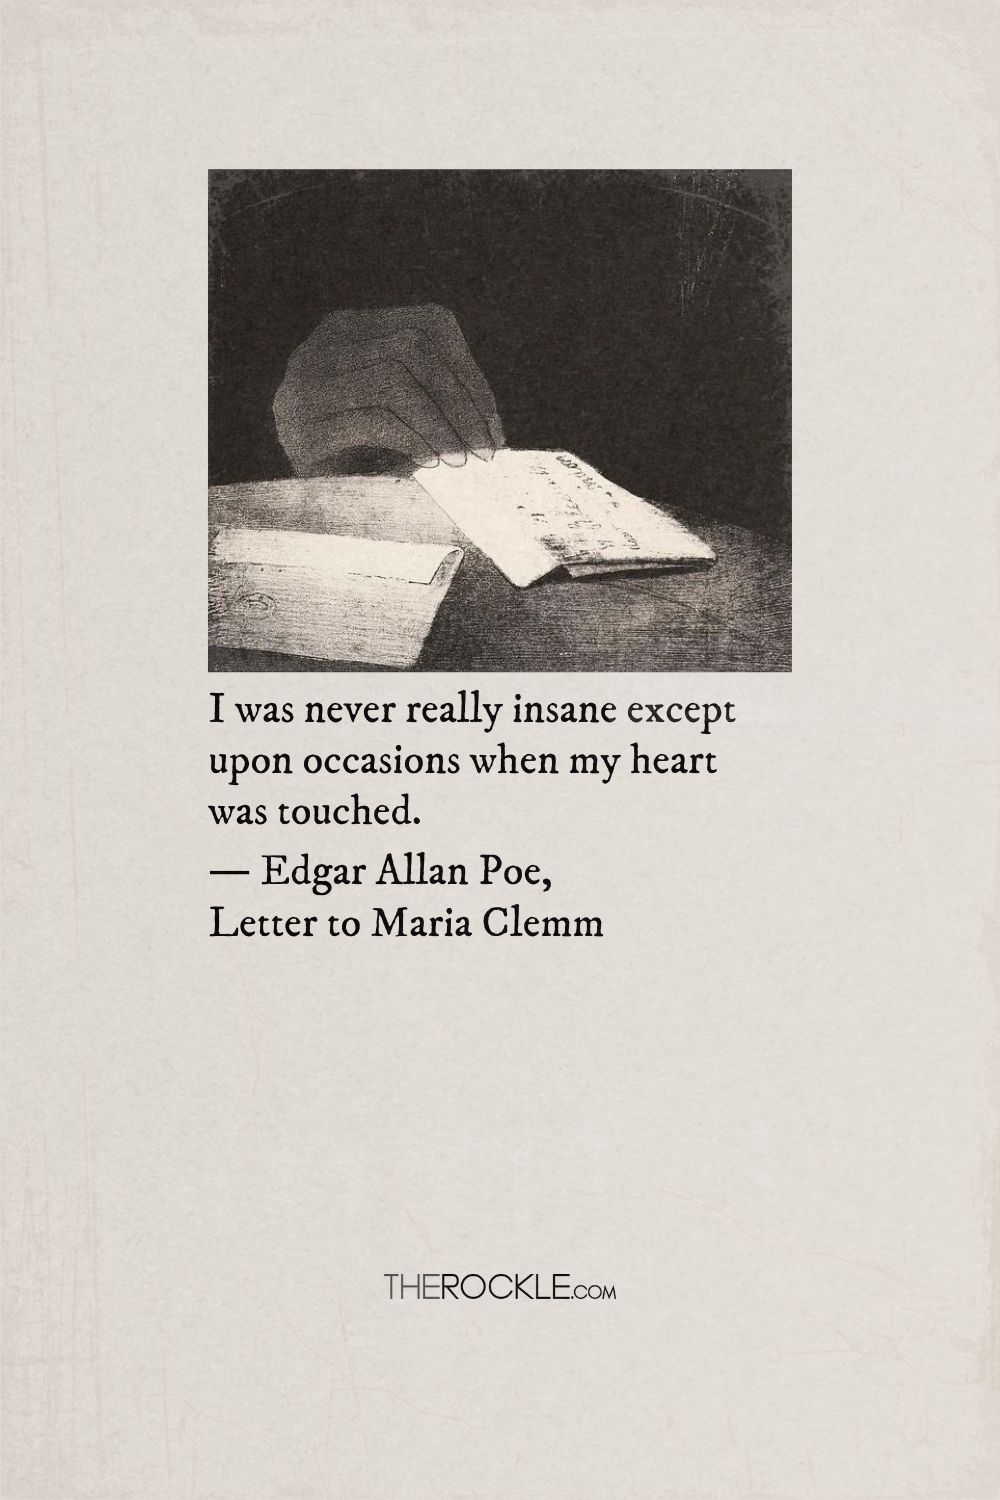 Quote from Edgar Allan Poe's letter